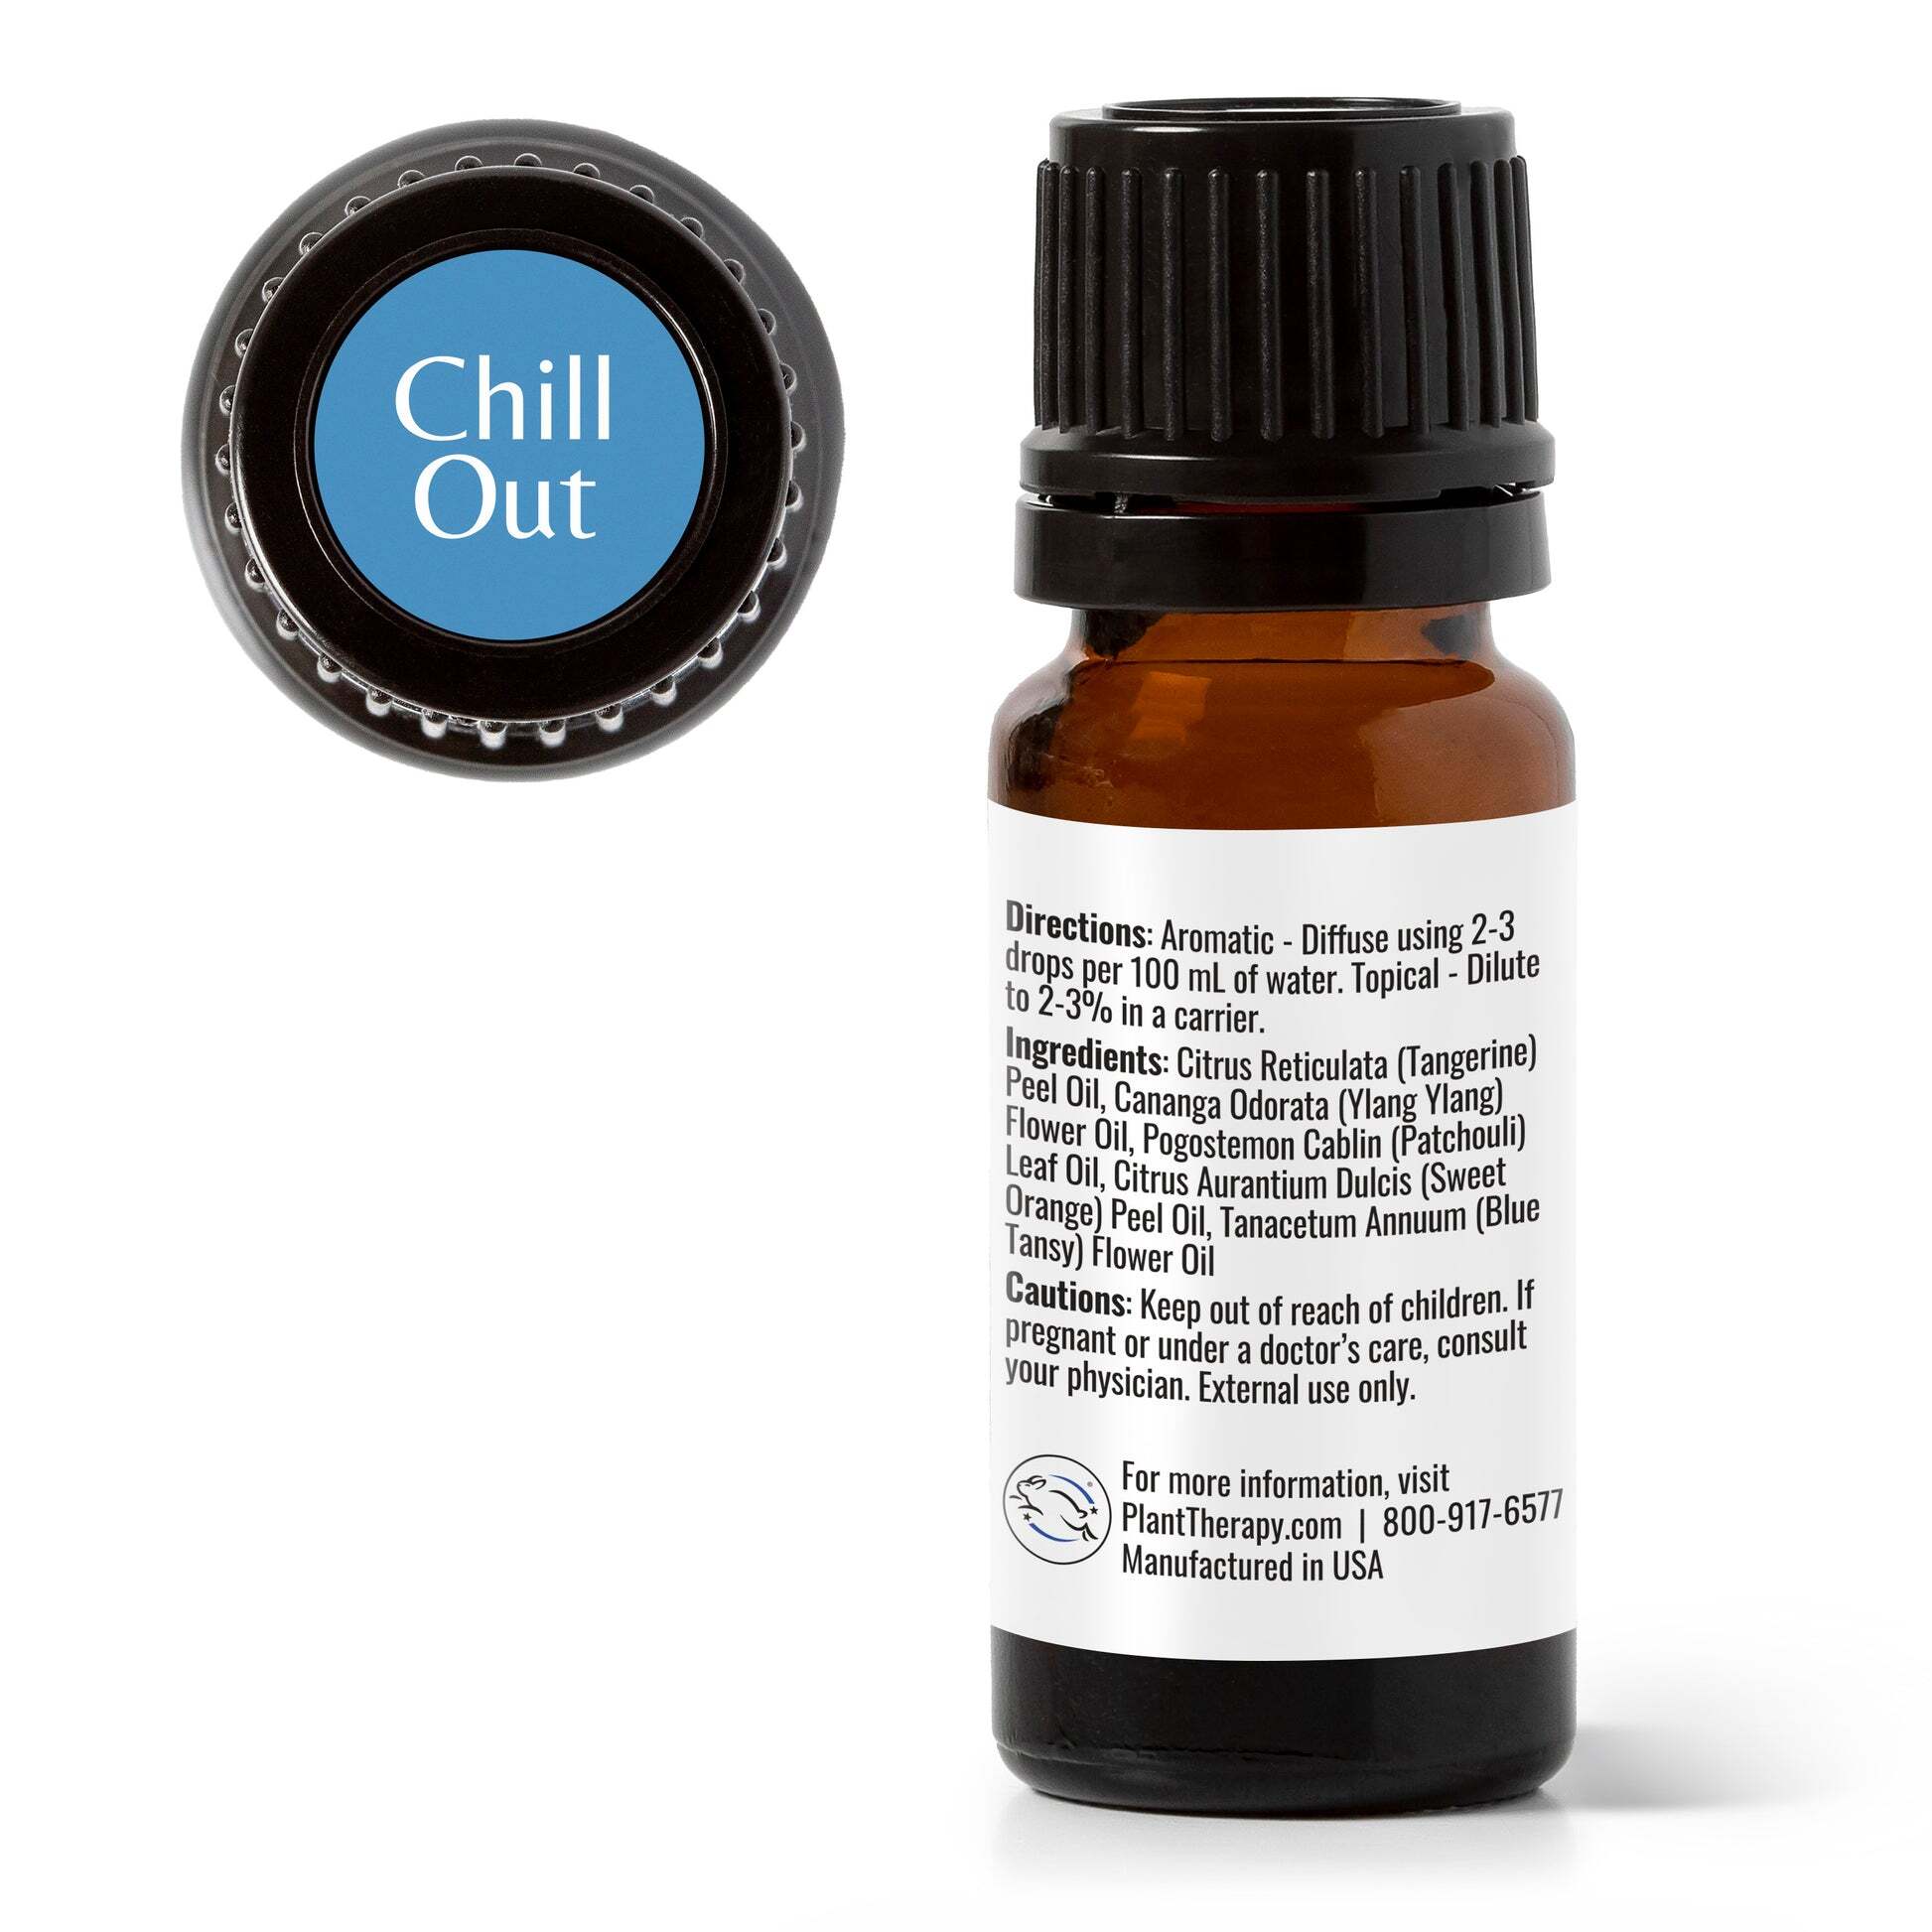 chill_out-10ml-02_1946x